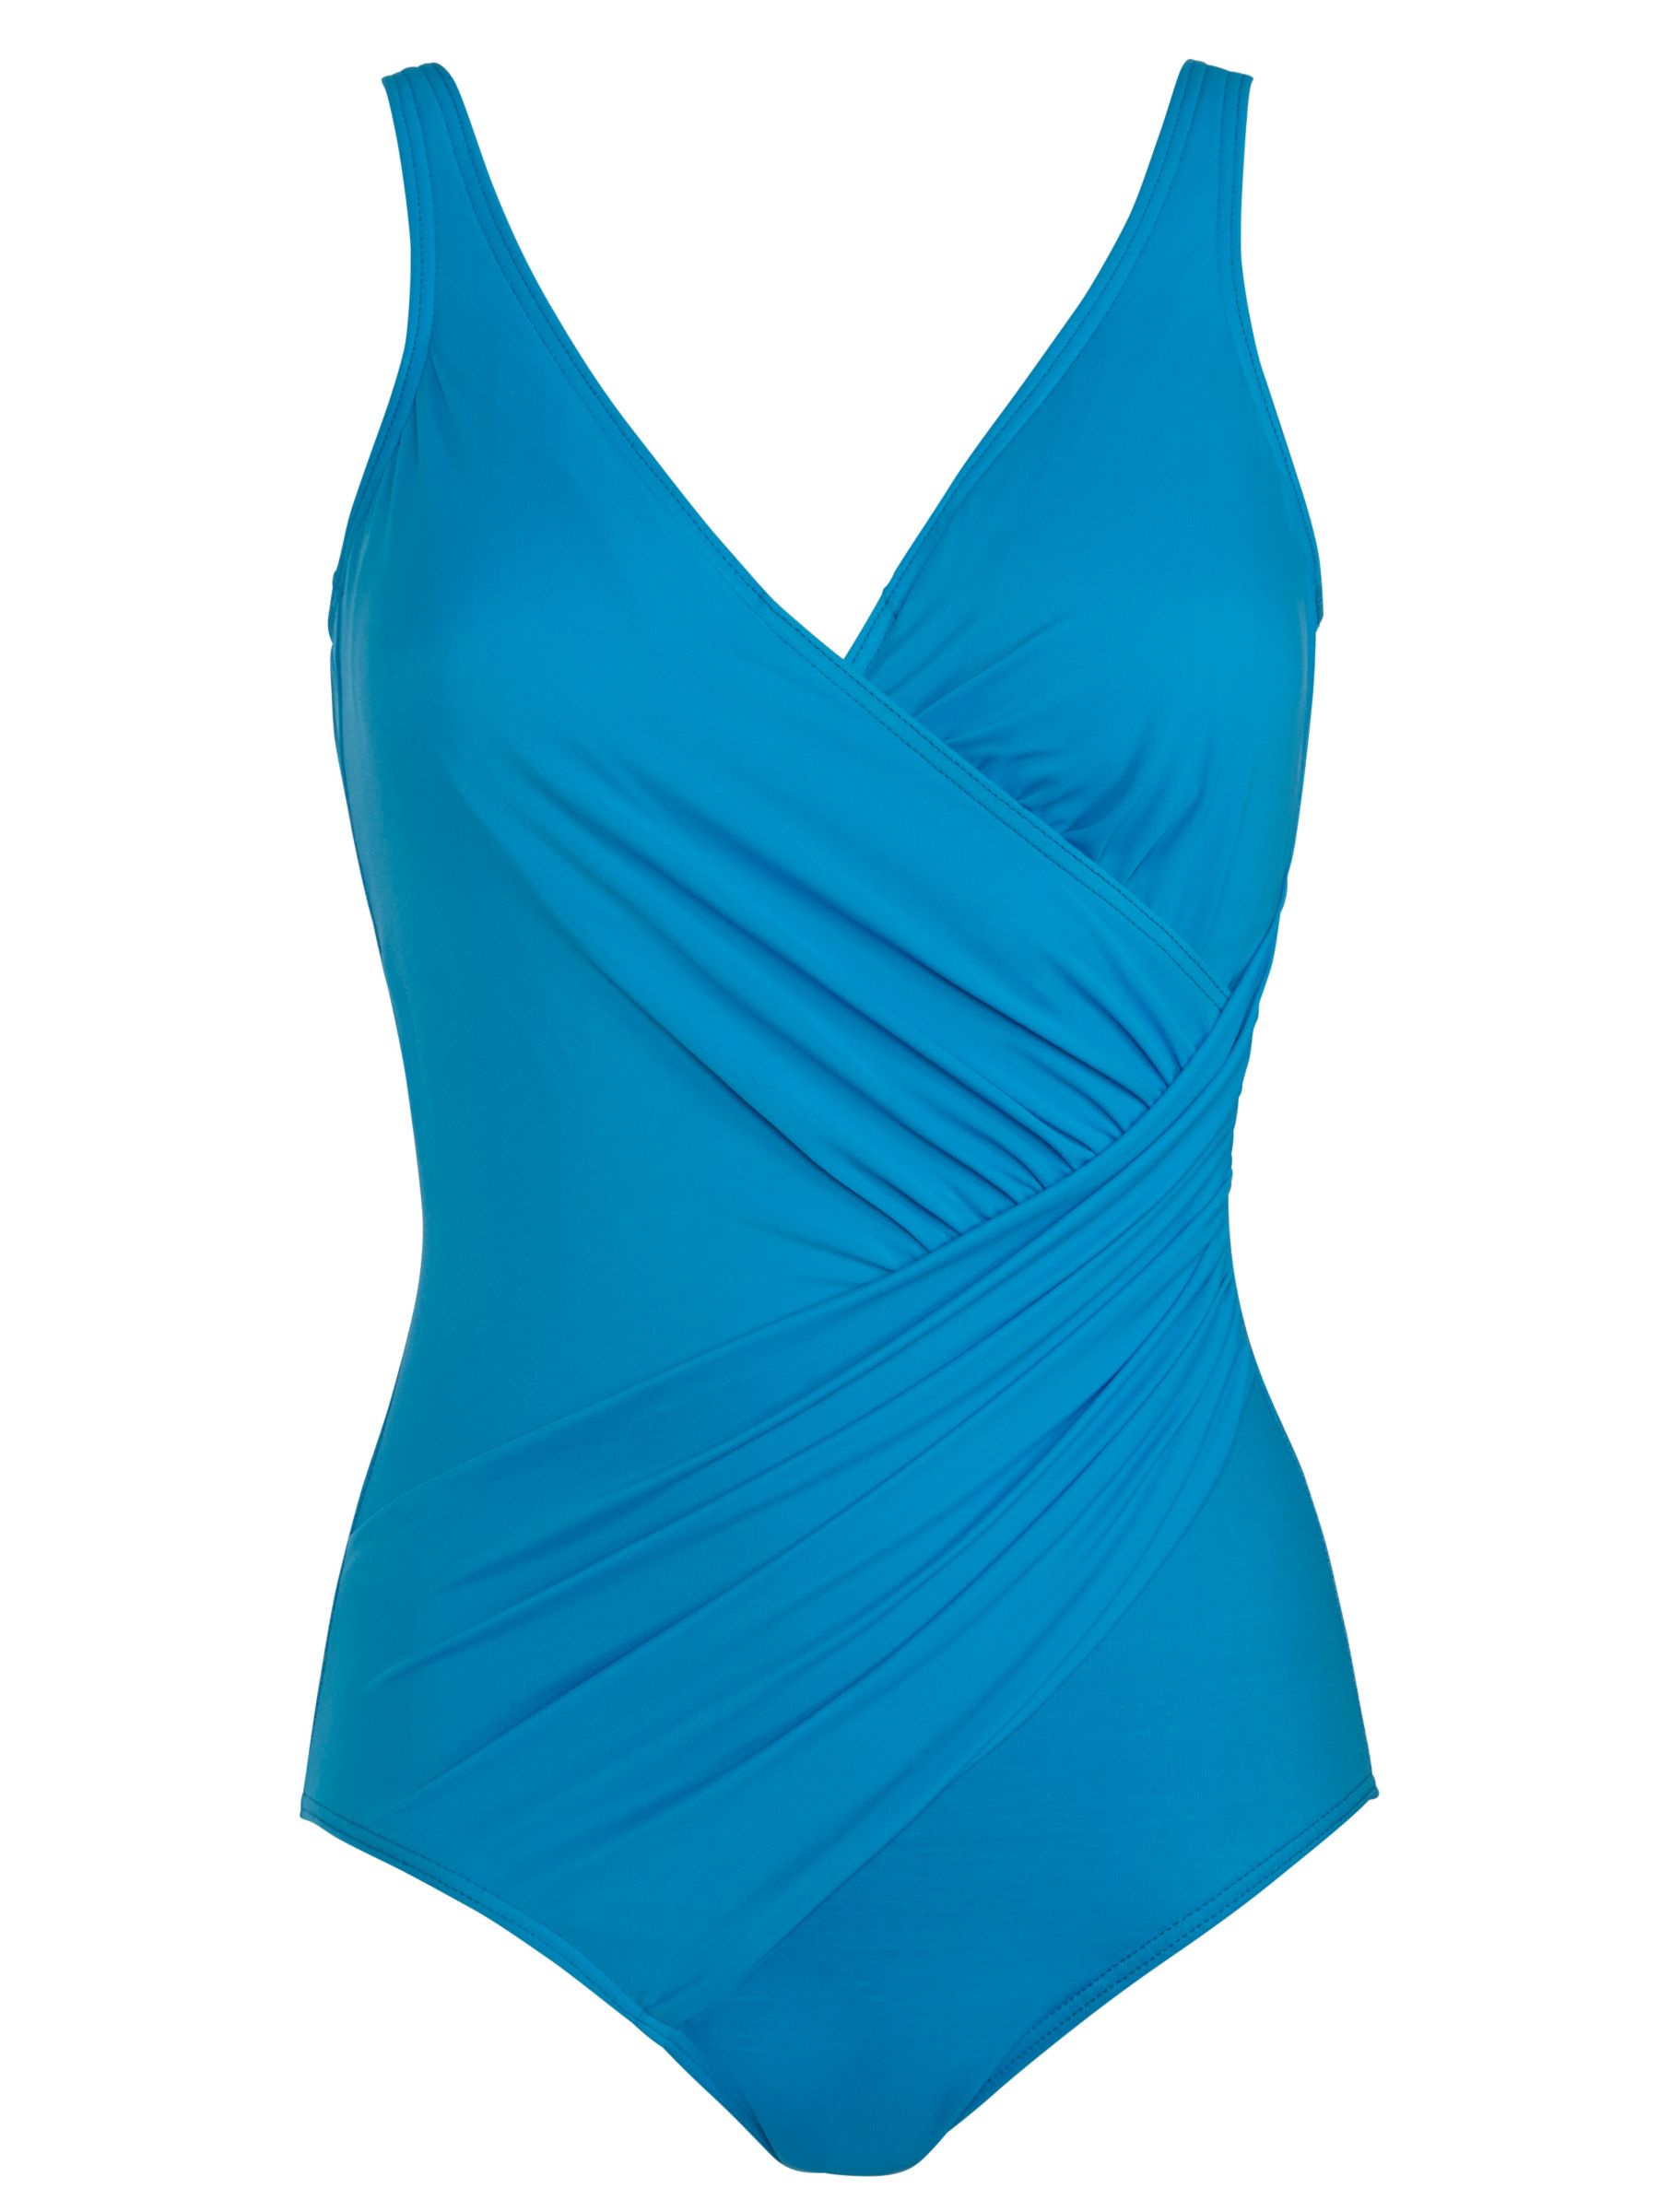 Buy Miraclesuit Oceanus Shaping Swimsuit, Turquoise Online at johnlewis.com